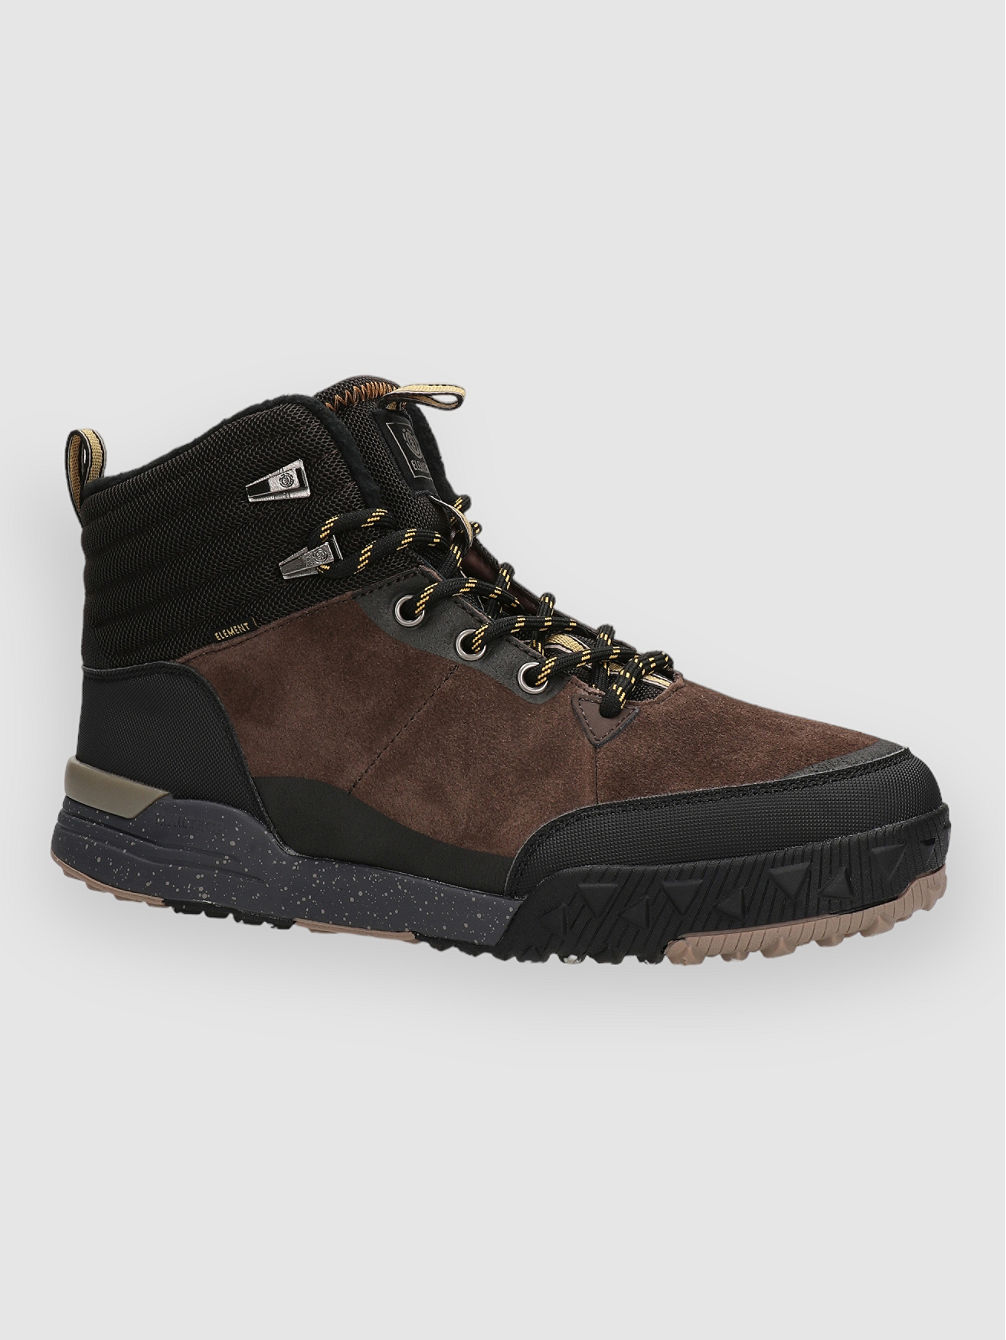 Donnelly Elite Winter Chaussures